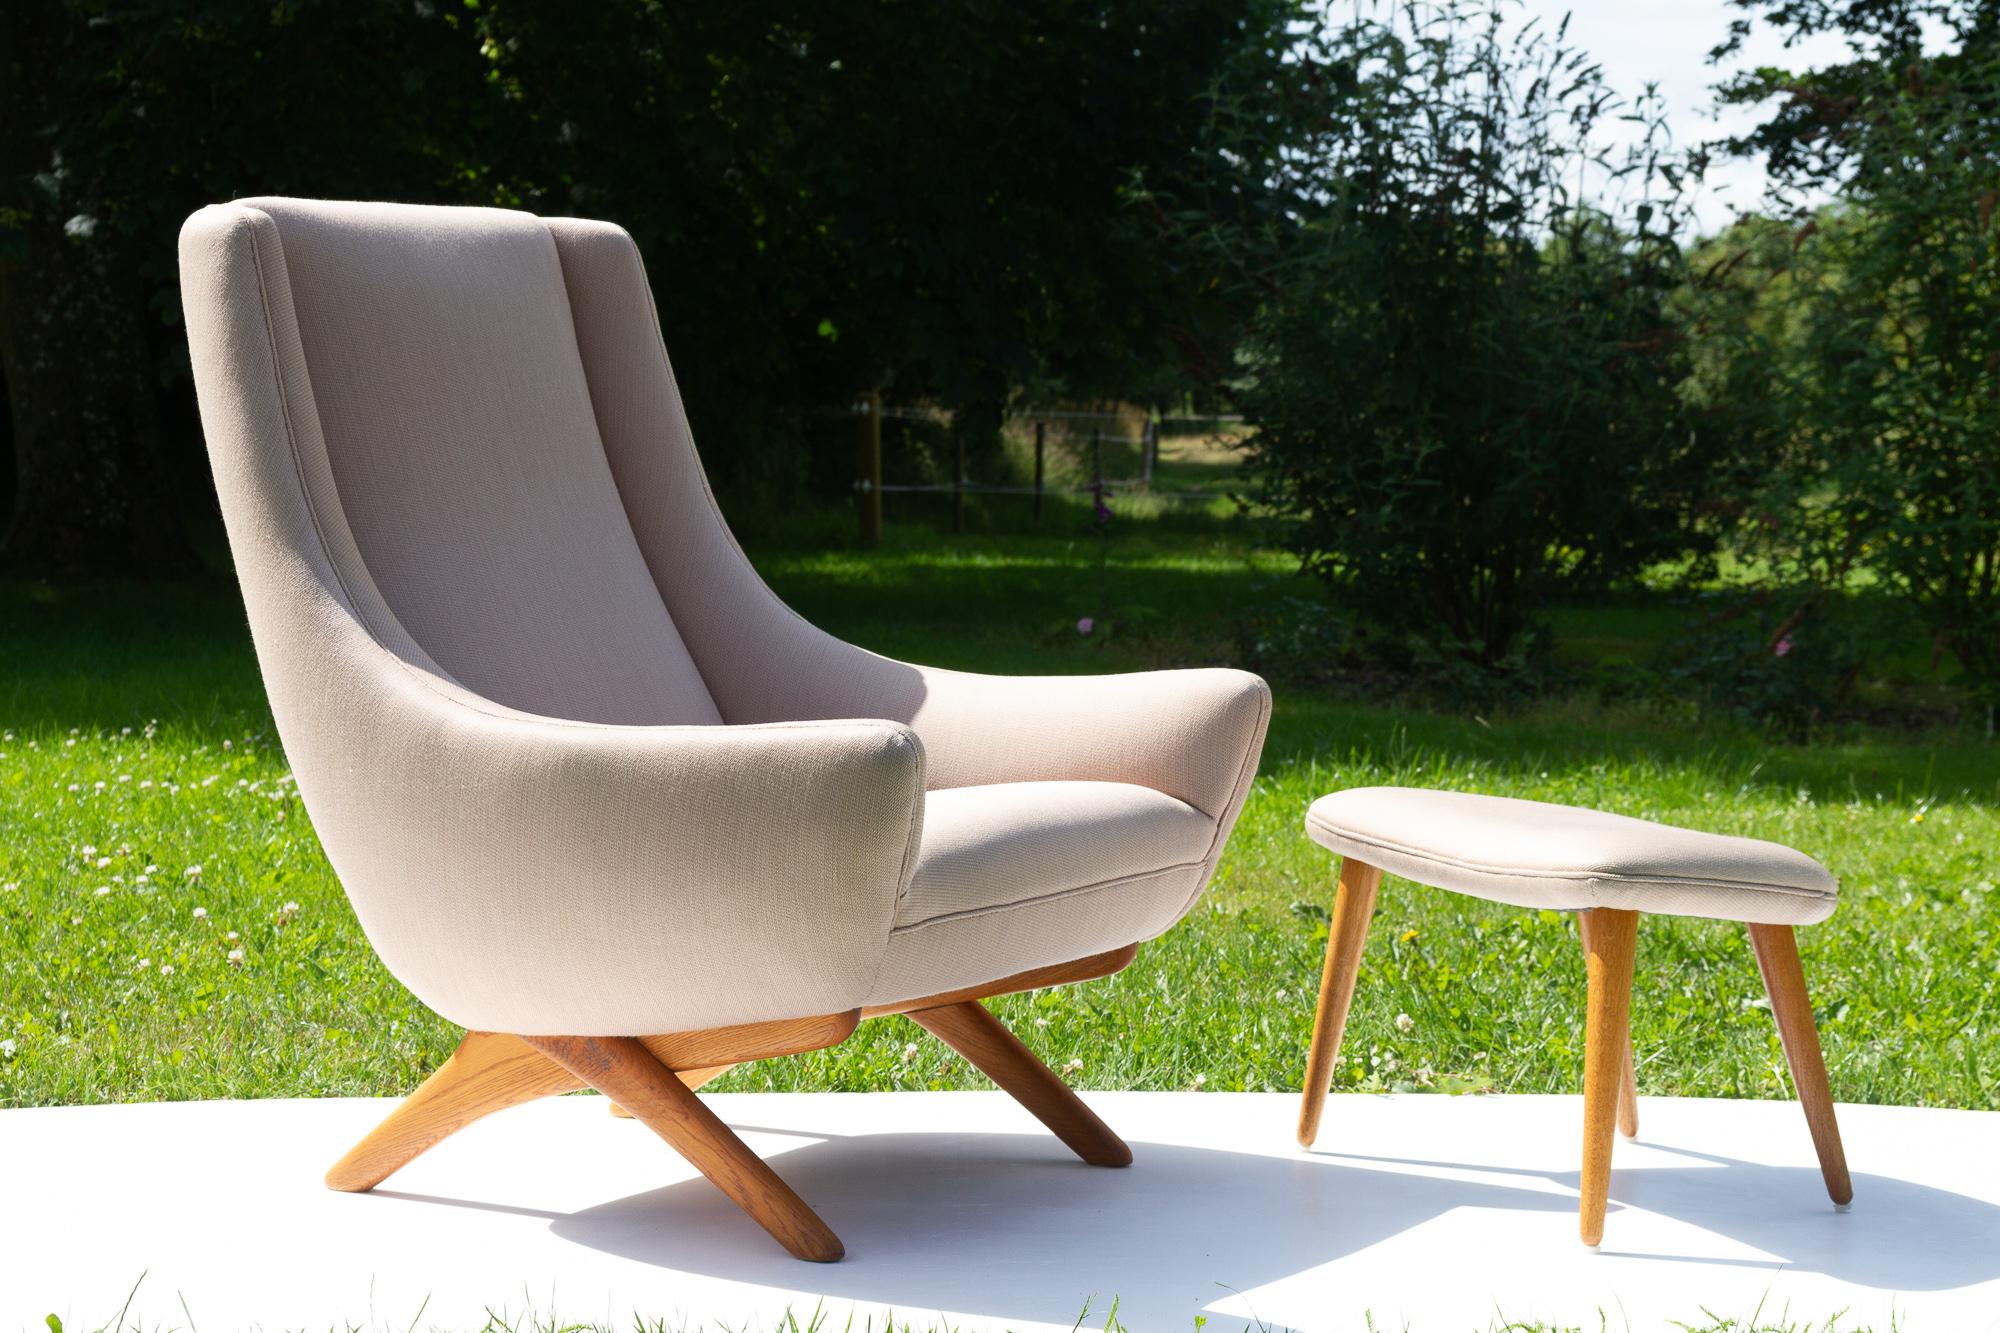 Mid-Century Danish Modern Lounge chair and stool model ML141 by Illum Wikkelsø for A. Mikael Laursen, 1960s.
Beautiful and elegant highback lounge chair with matching ottoman designed by renowned Danish architect Illum Wikkelsø and manufactured by